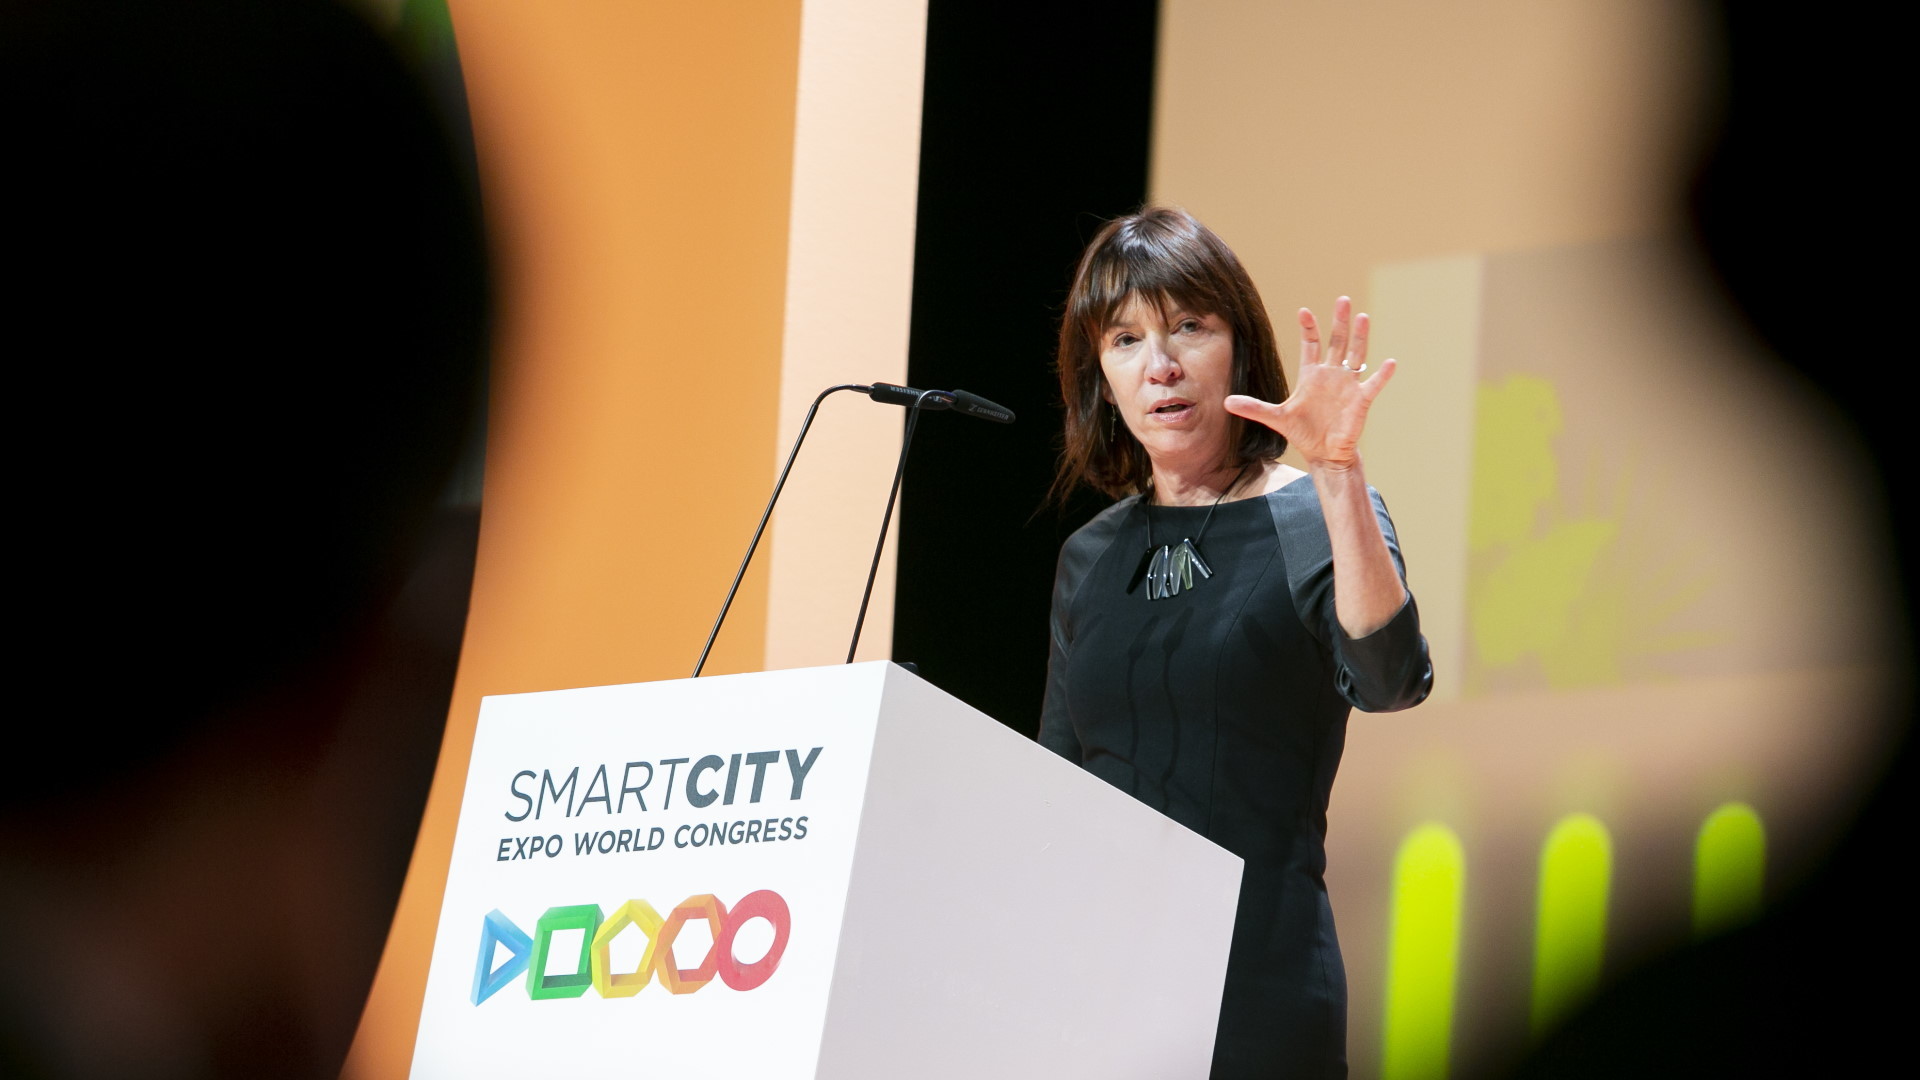 Janette Sadik-Khan, former NYC Transportation Commissioner: Freedom is about being able to go anywhere without having to use a car